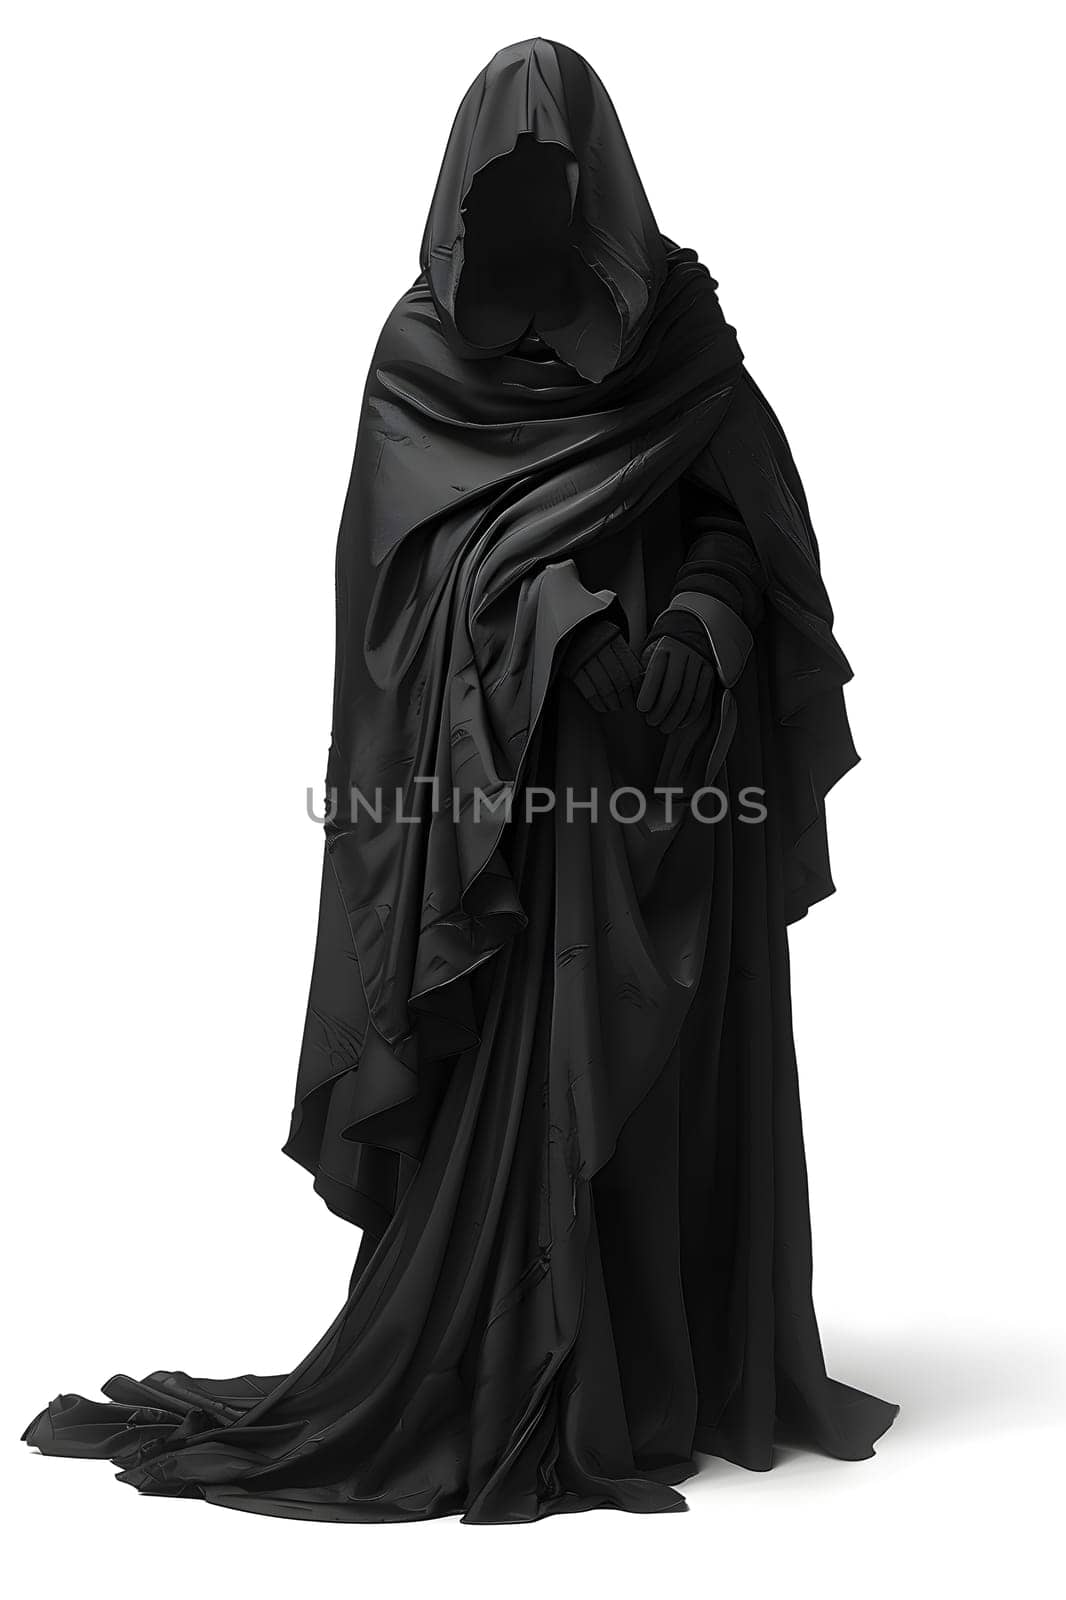 Grim Reaper in long black cloak with hood outerwear sculpture by Nadtochiy